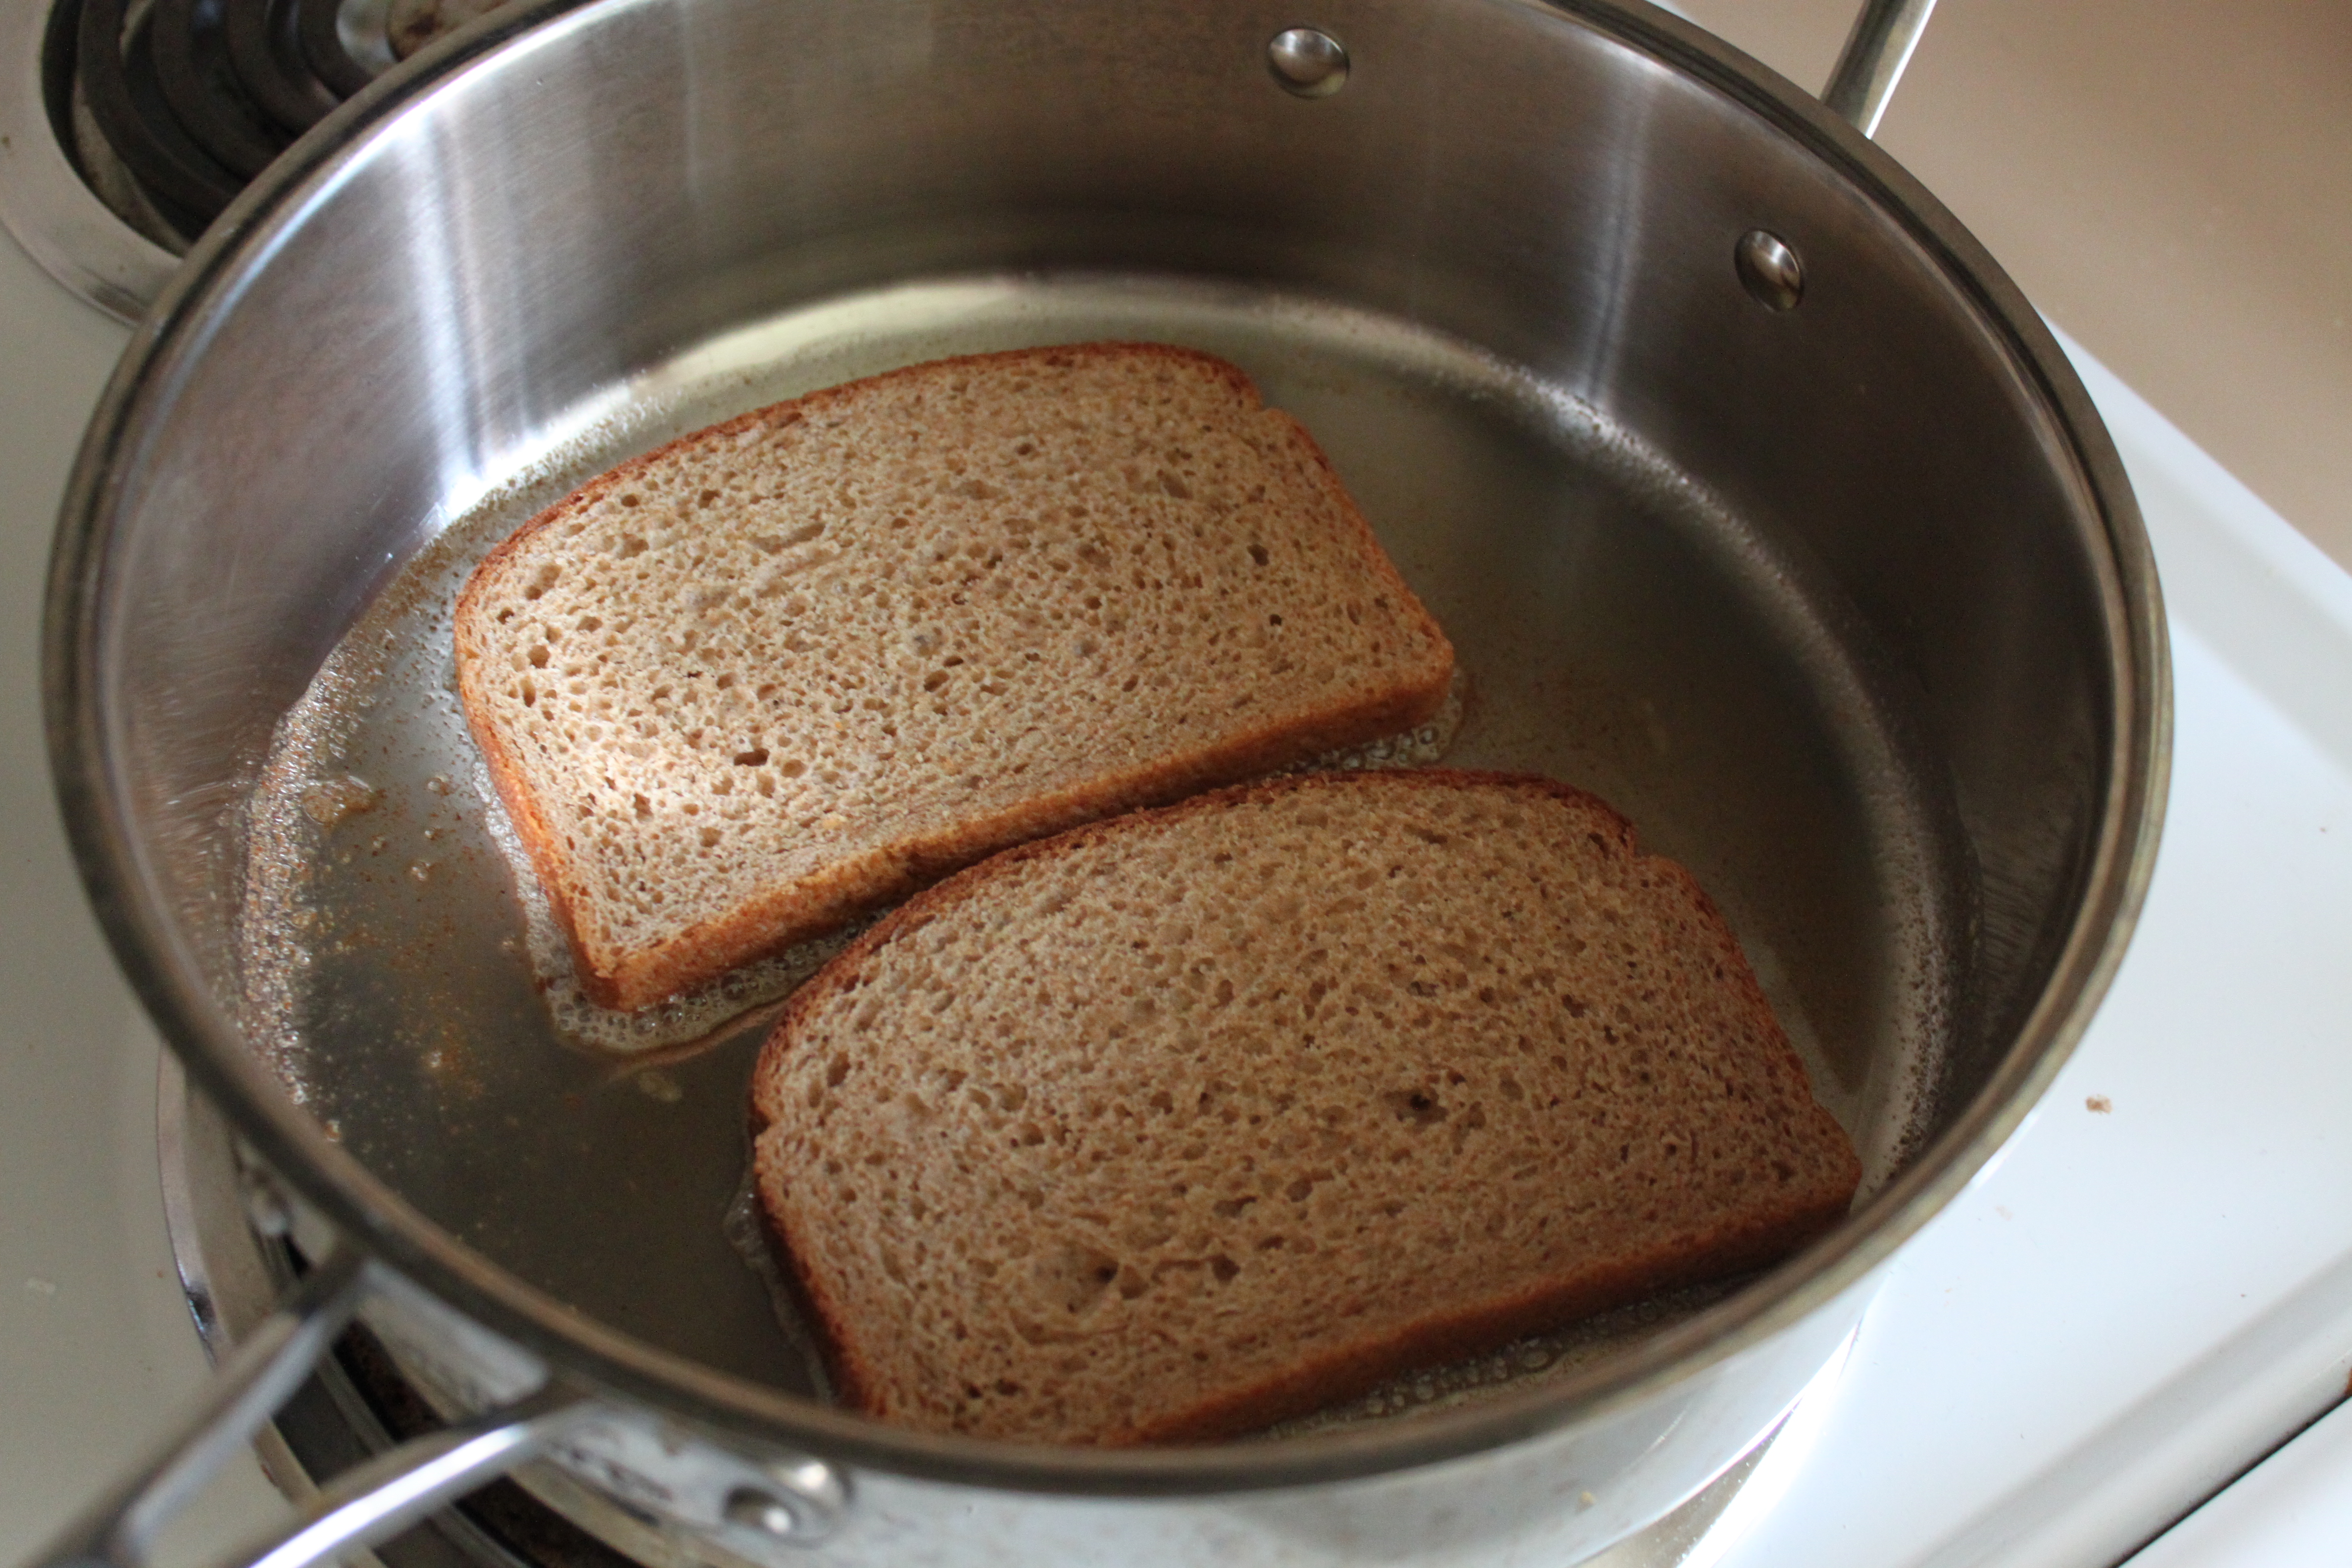 Add bread to brown butter